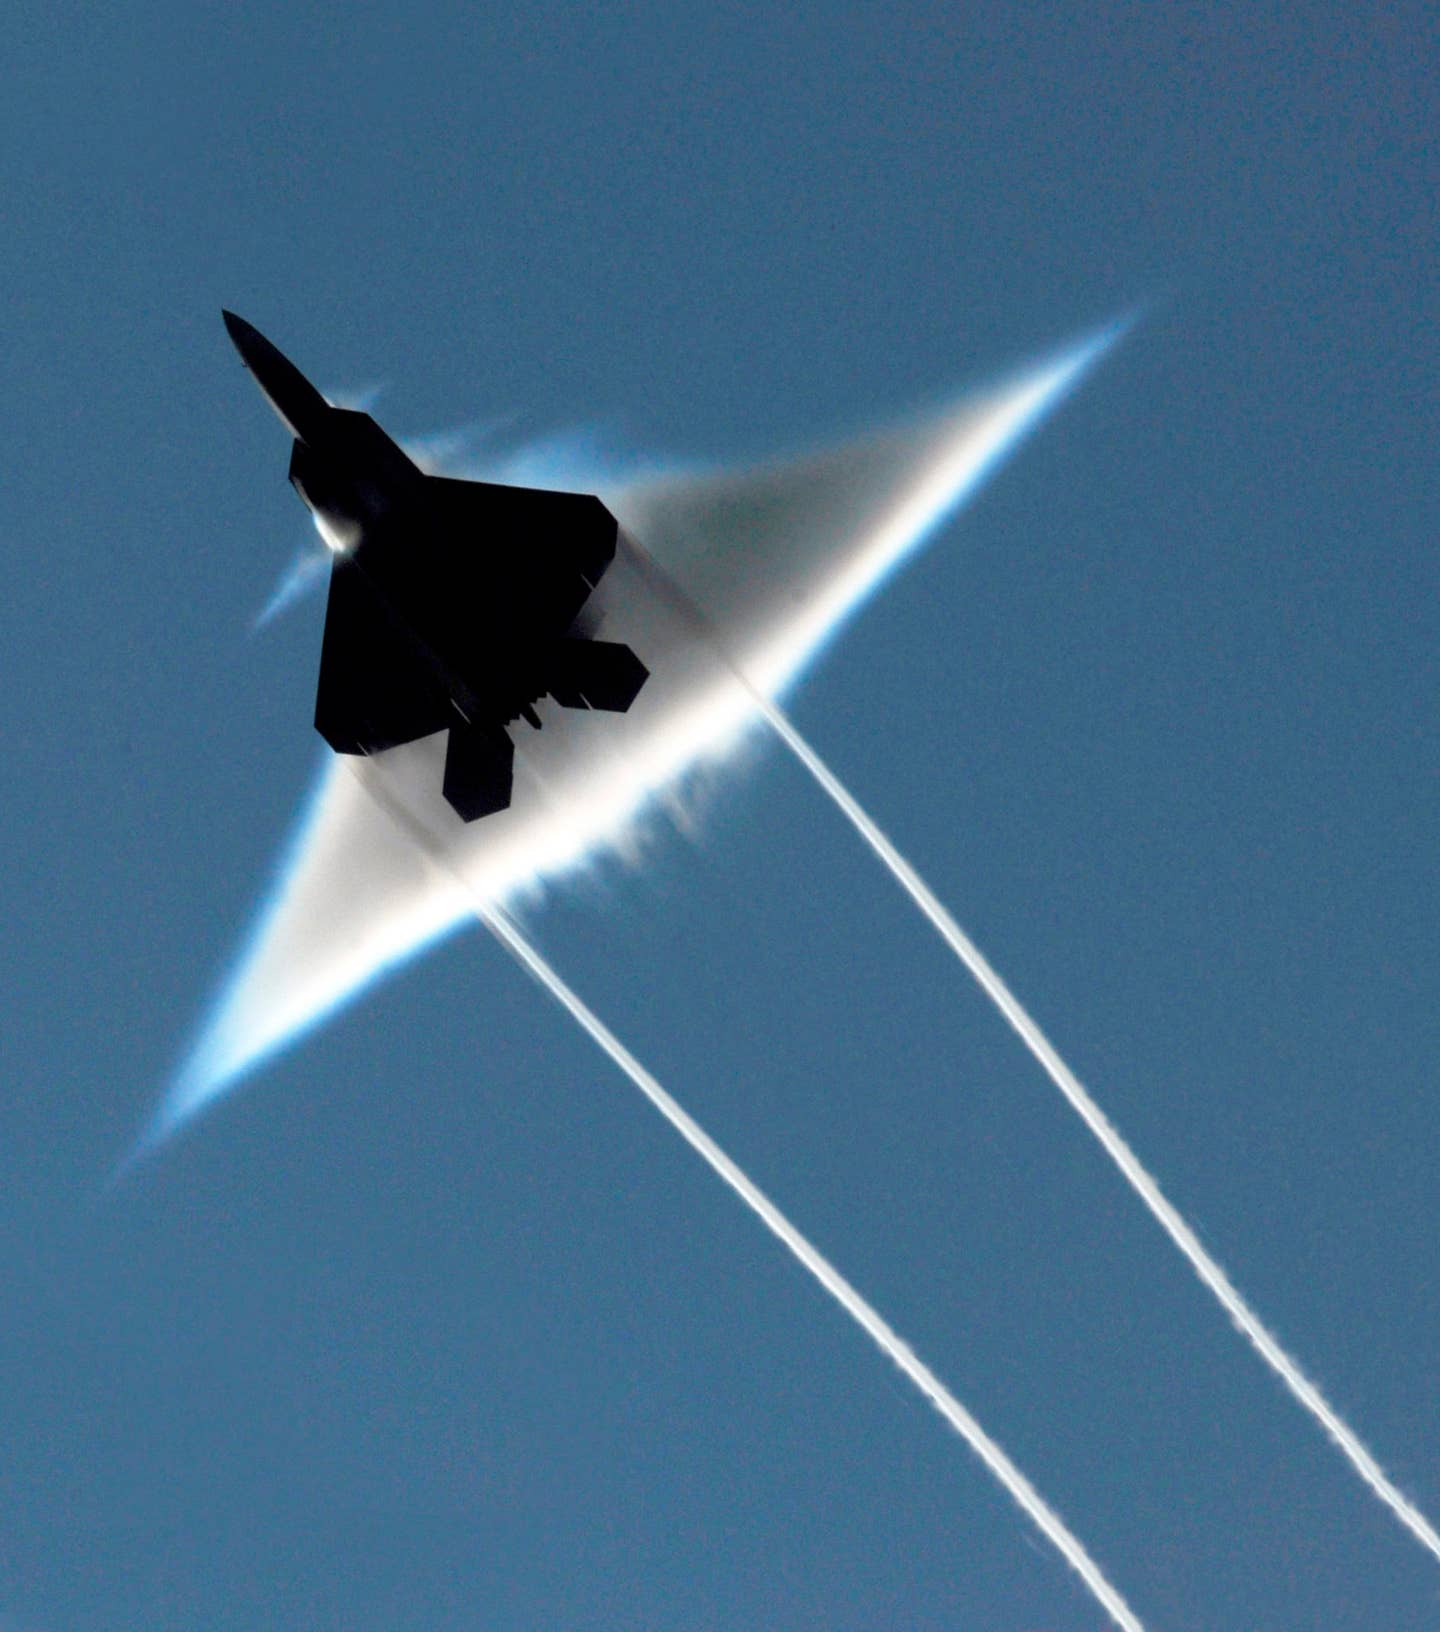 An Air Force F-22 Raptor executes a supersonic flyby over the flight deck of the aircraft carrier USS John C. Stennis (CVN 74). John C. Stennis is participating in Northern Edge 2009, a joint exercise focusing on detecting and tracking units at sea, in the air and on land. (U.S. Navy photo by Sonar Technician (Surface) 1st Class Ronald Dejarnett)